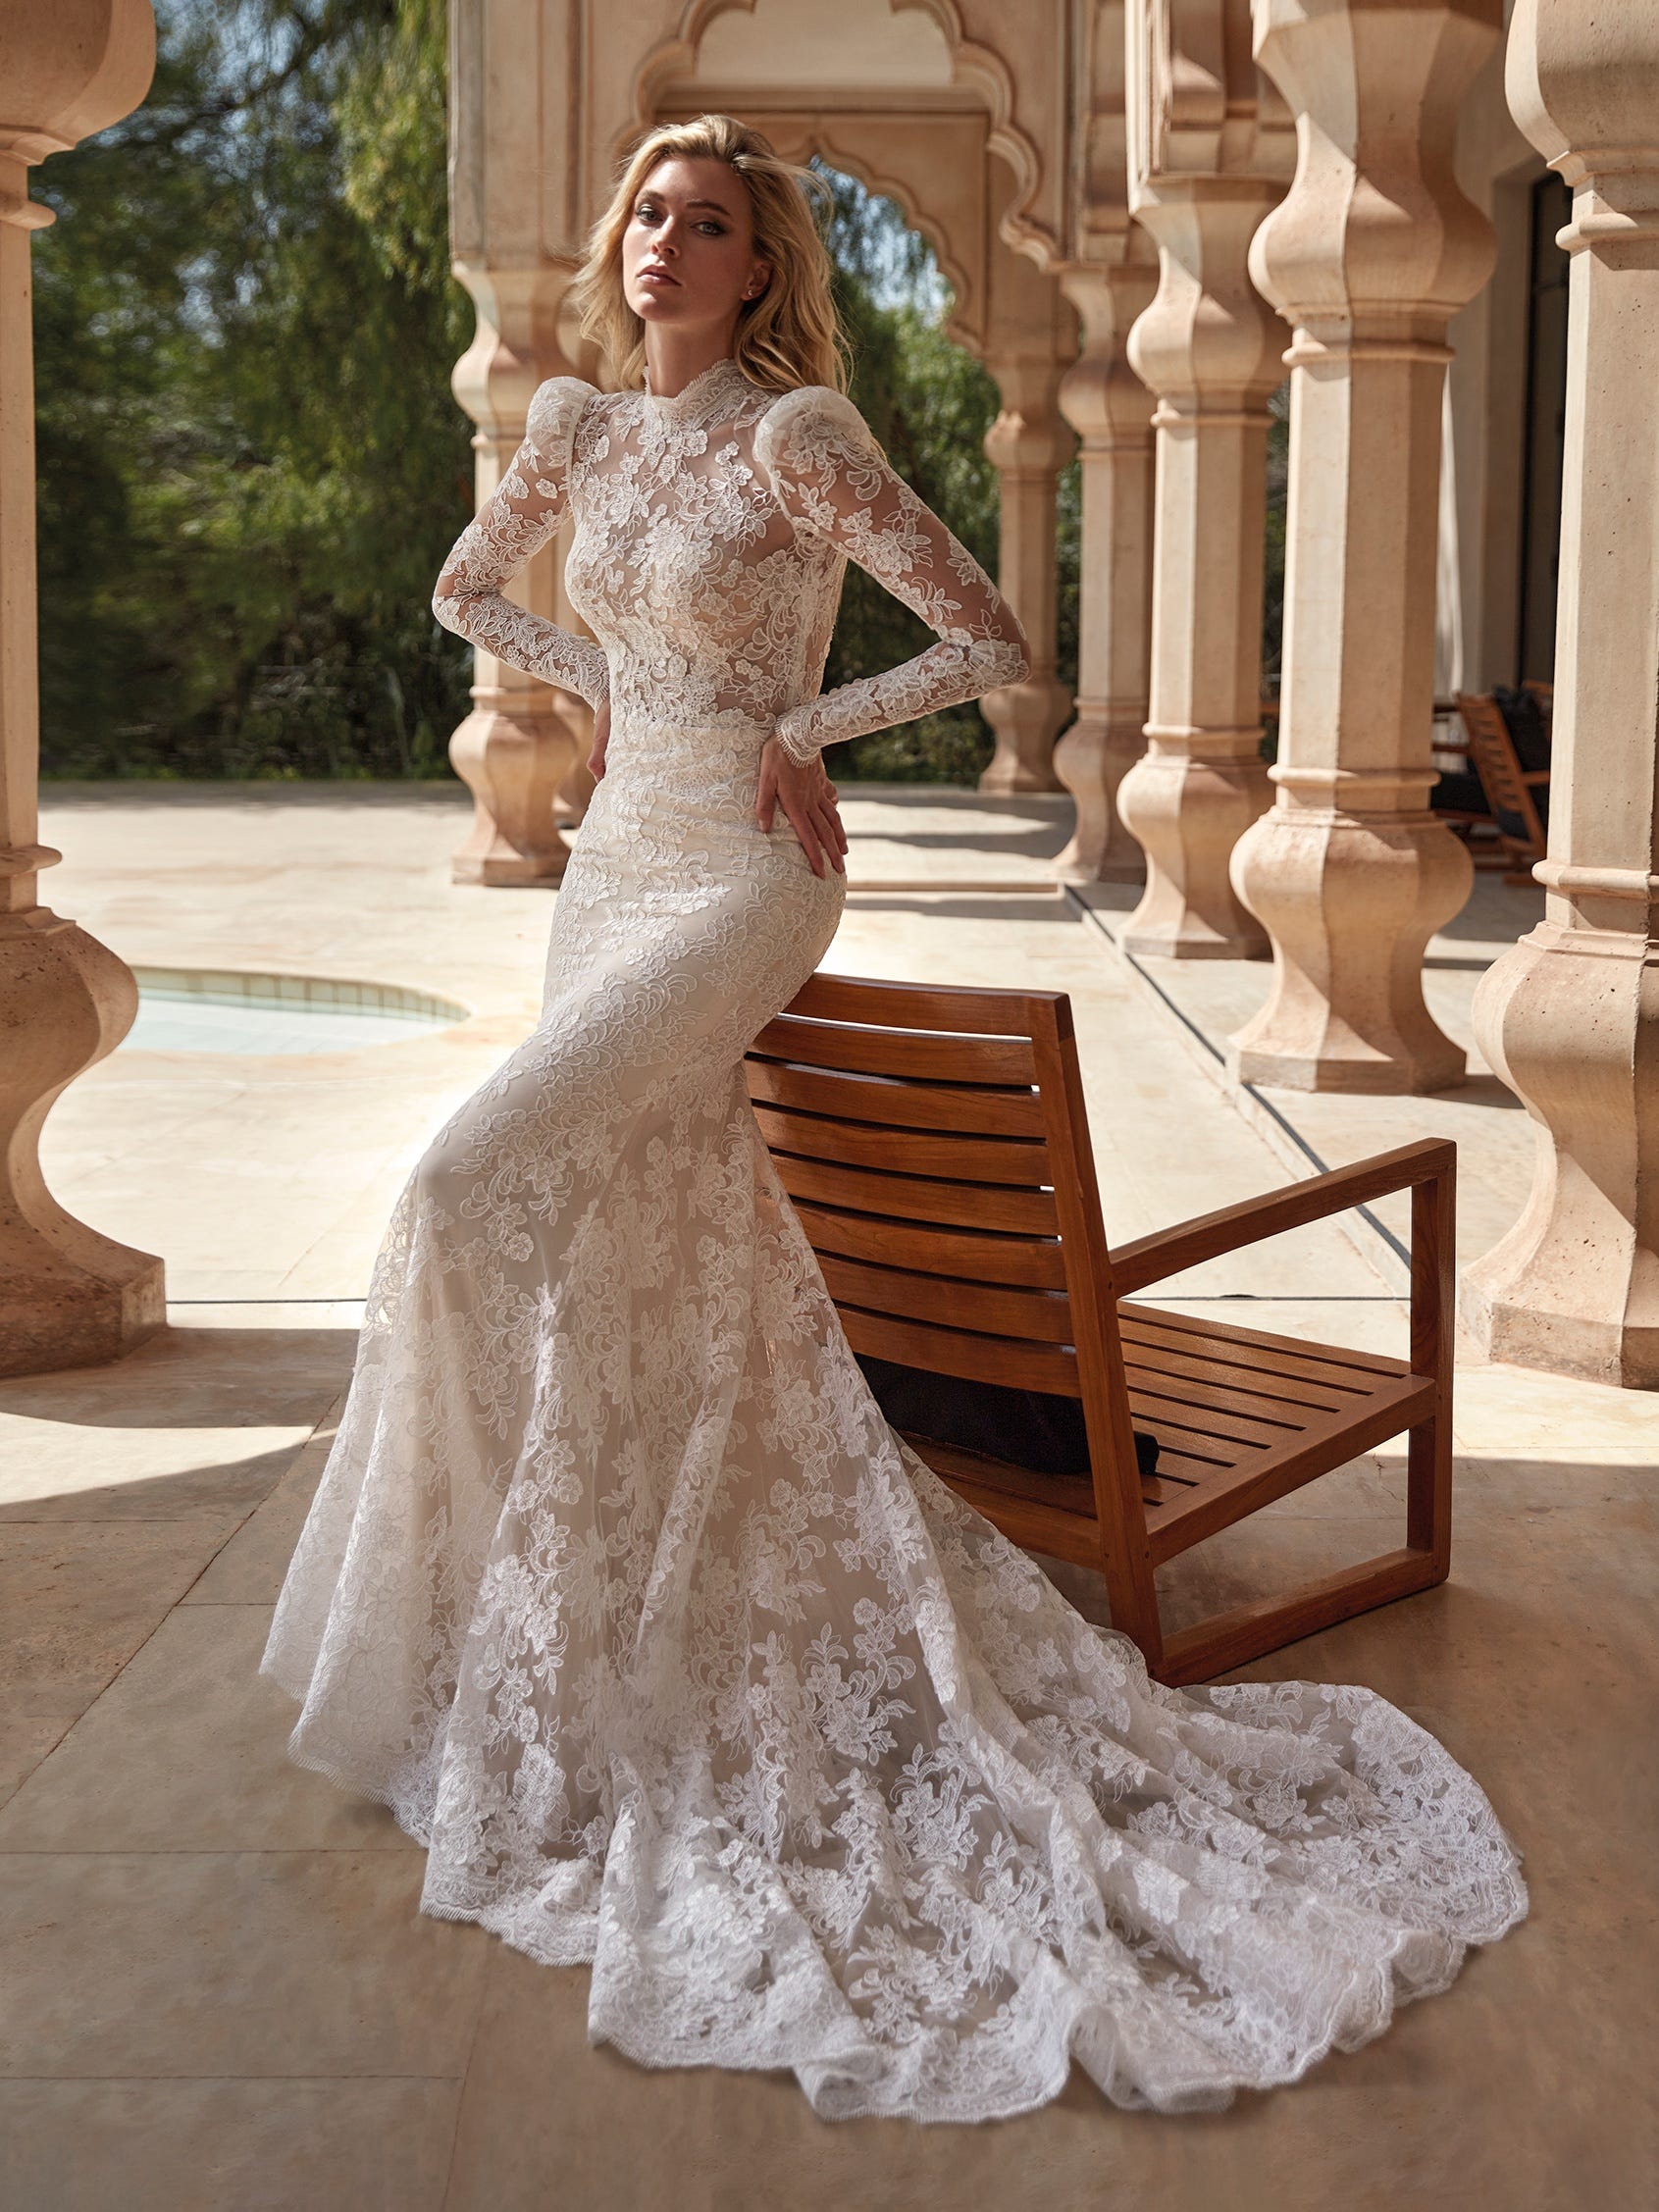 Lace Wedding Dresses for a Breathtaking Look